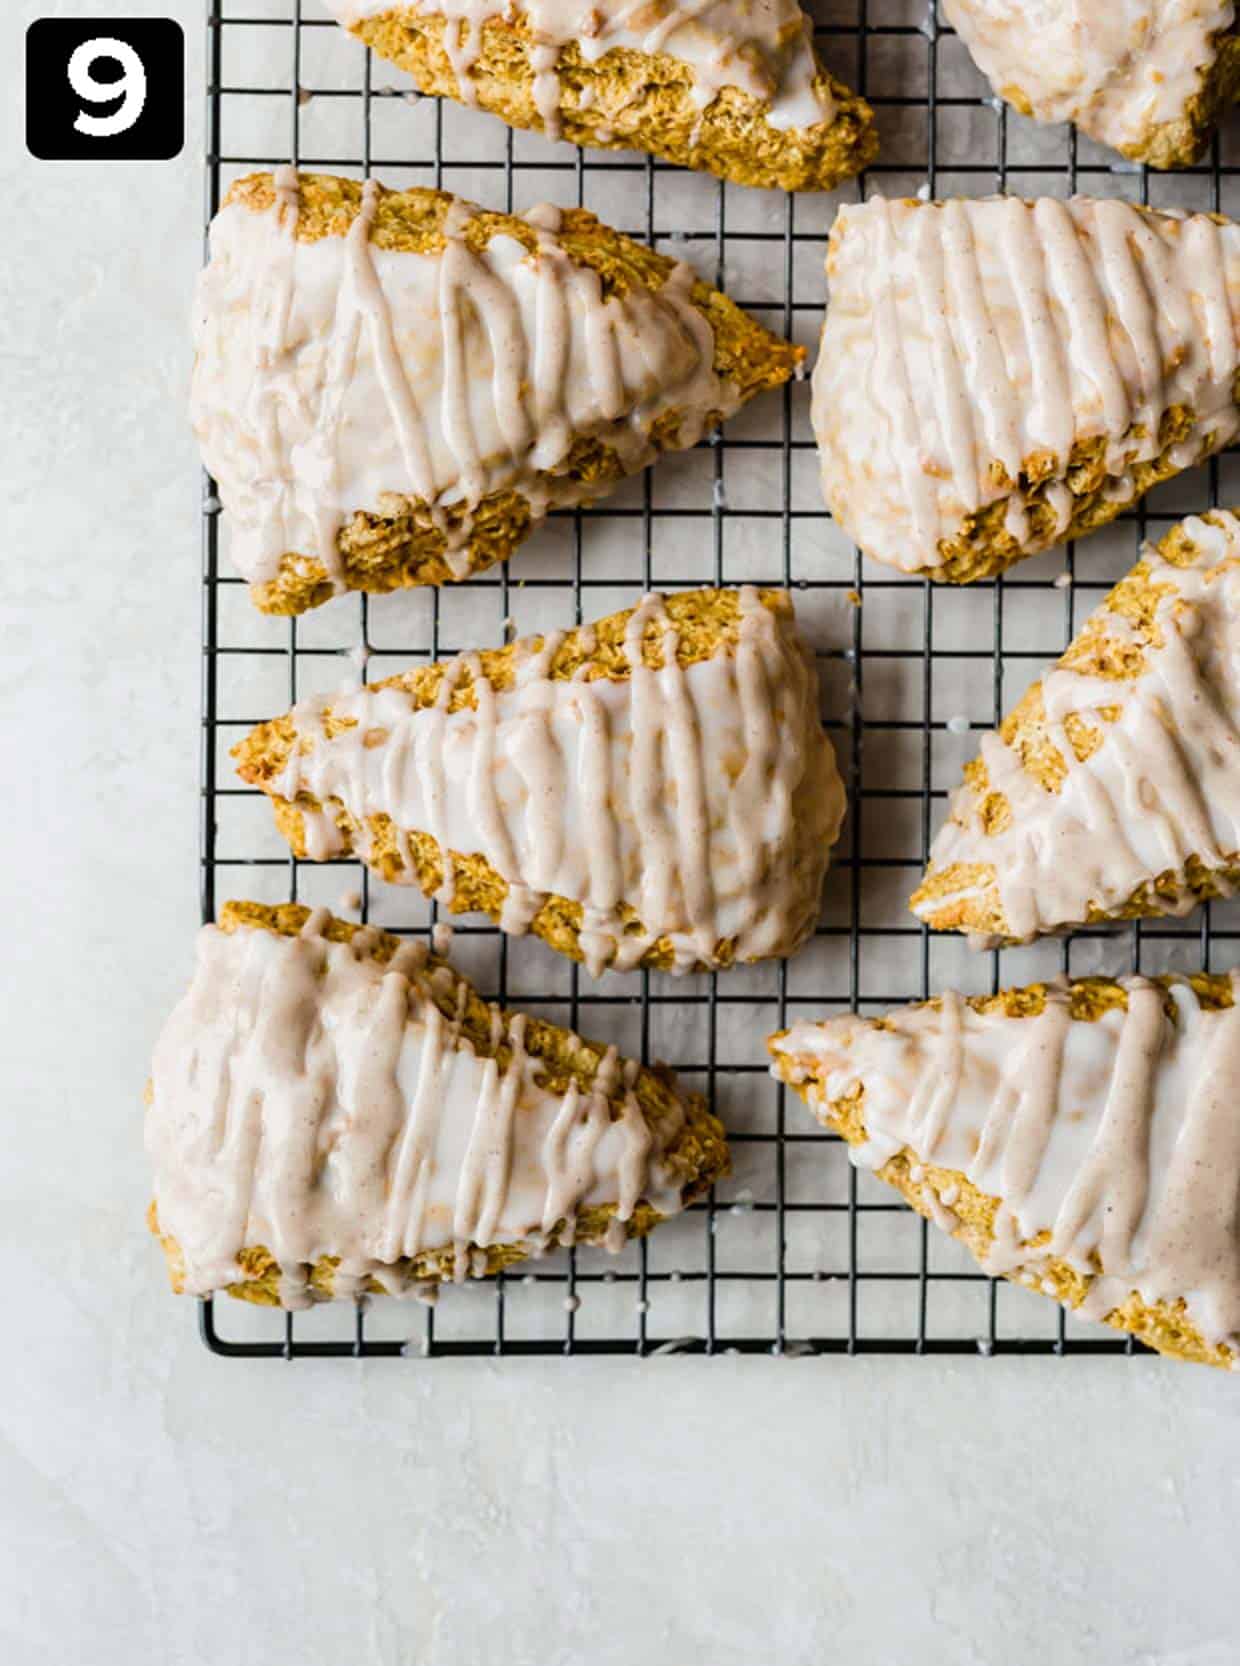 Pumpkin scones topped with a spiced glaze, on a wire cooling rack.